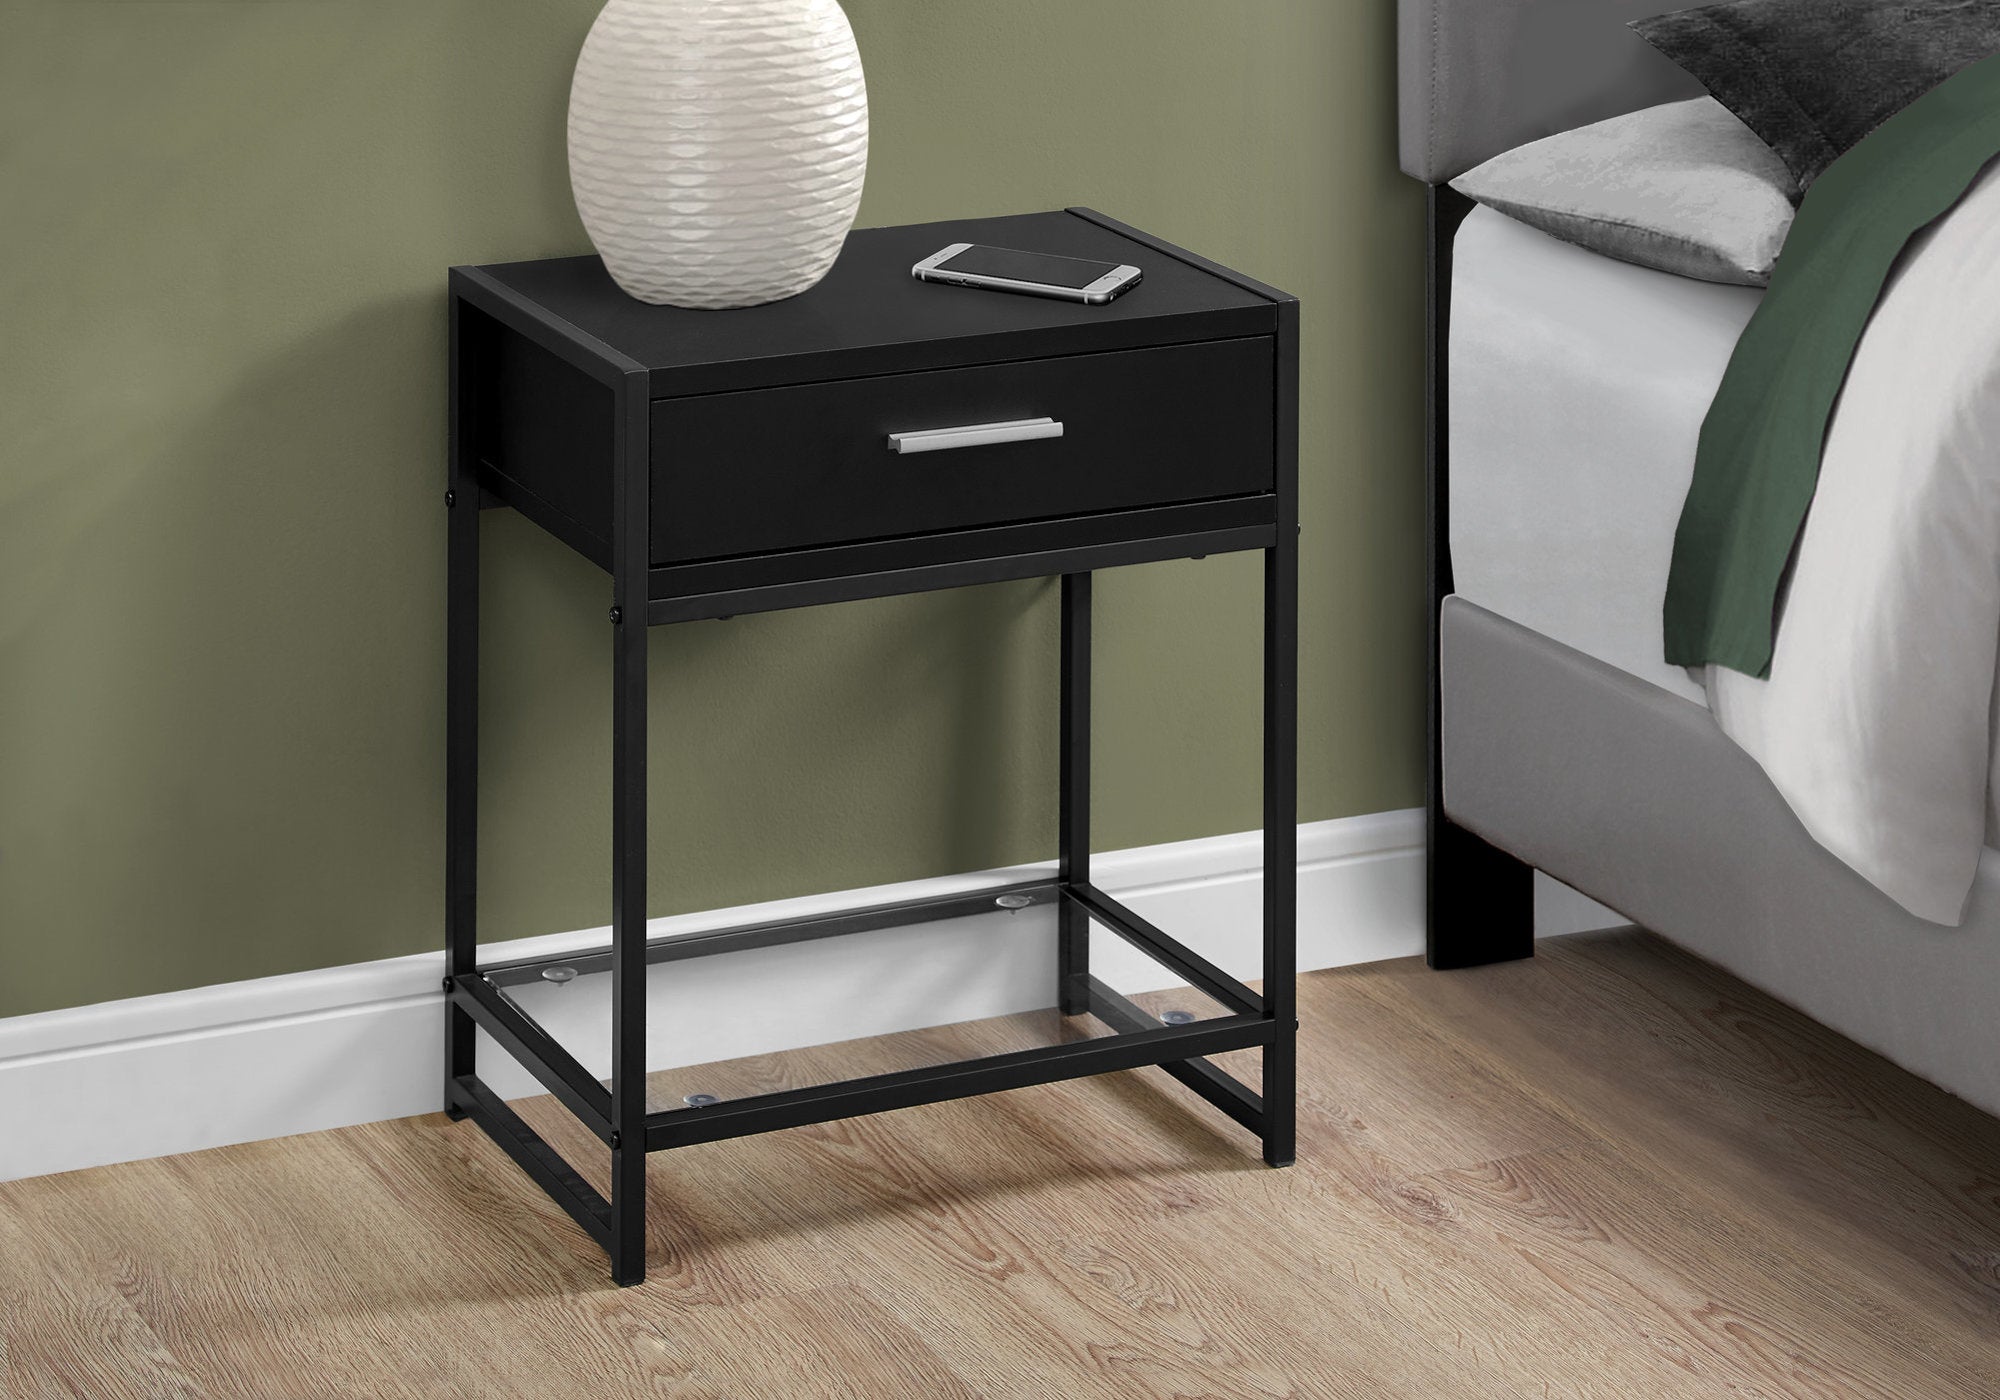 MN-993502    Accent Table, Side, End, Nightstand, Lamp, Living Room, Bedroom, Metal Legs, Tempered Glass And Laminate, Black, Clear, Contemporary, Modern